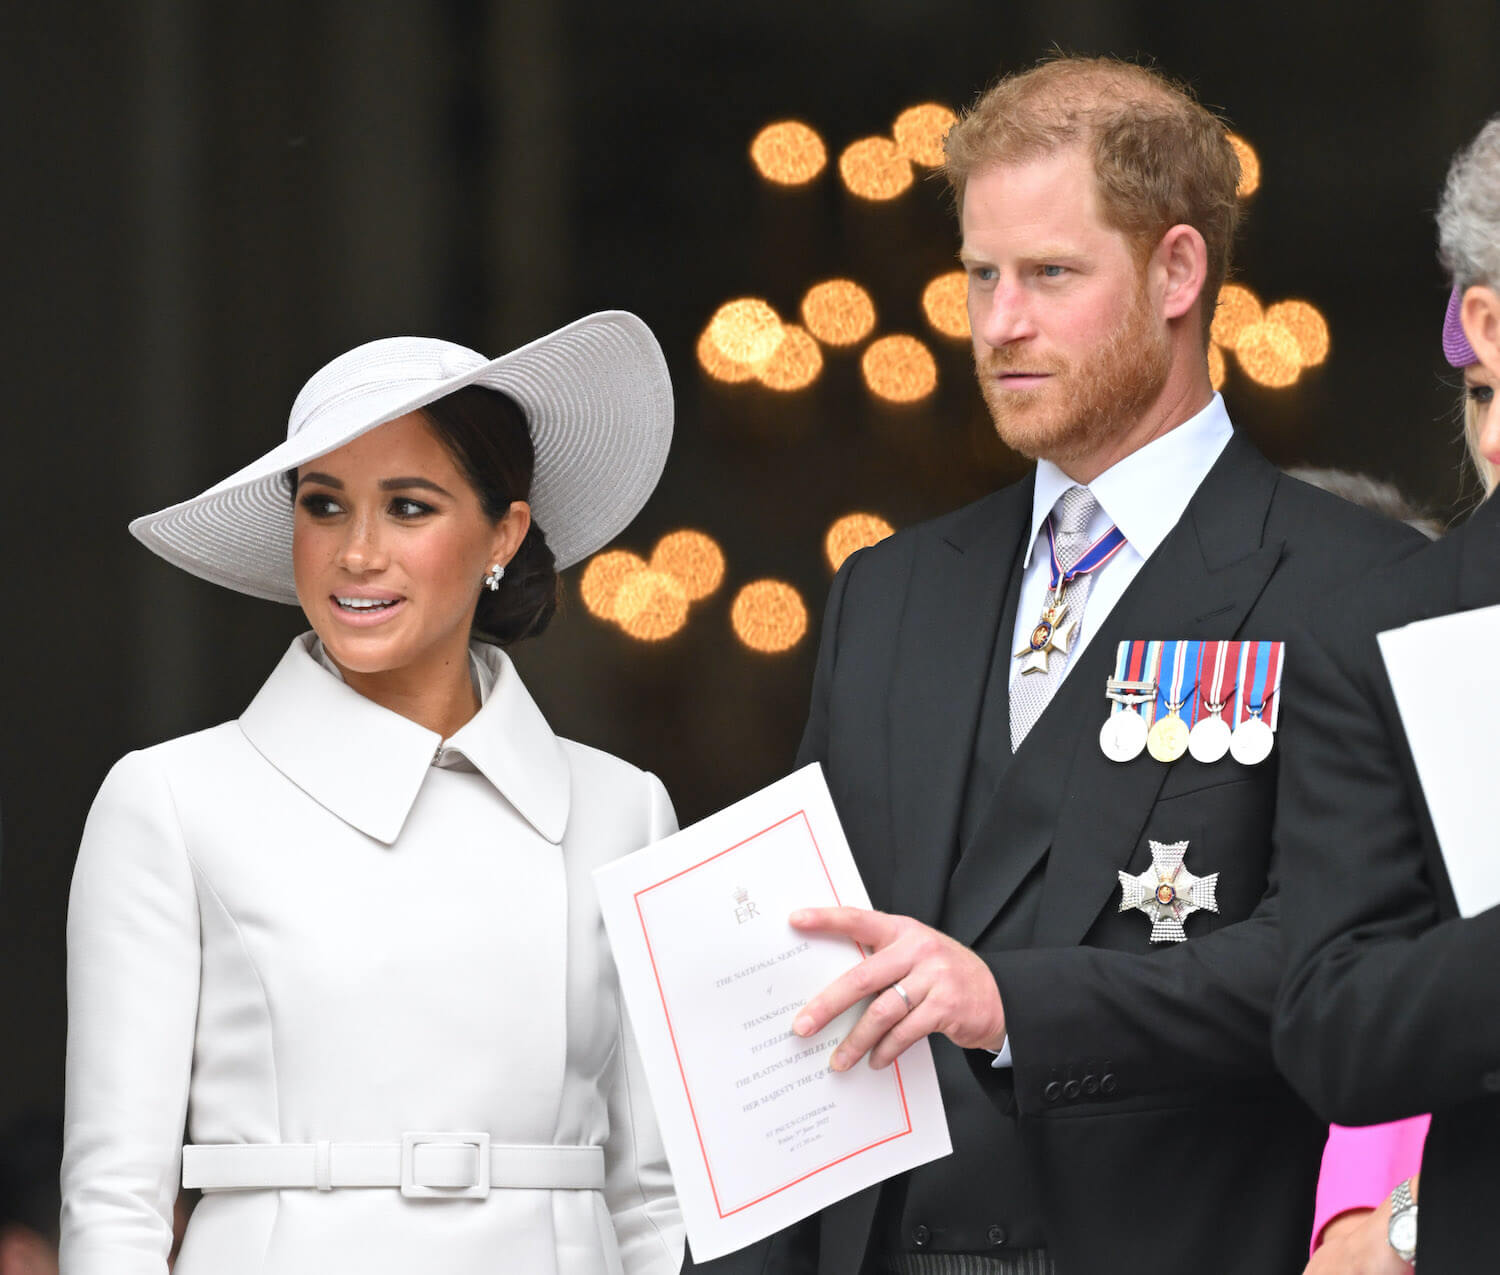 Meghan Markle wears a white coat and white hat, while Prince Harry wears a suit and tie as they both look on